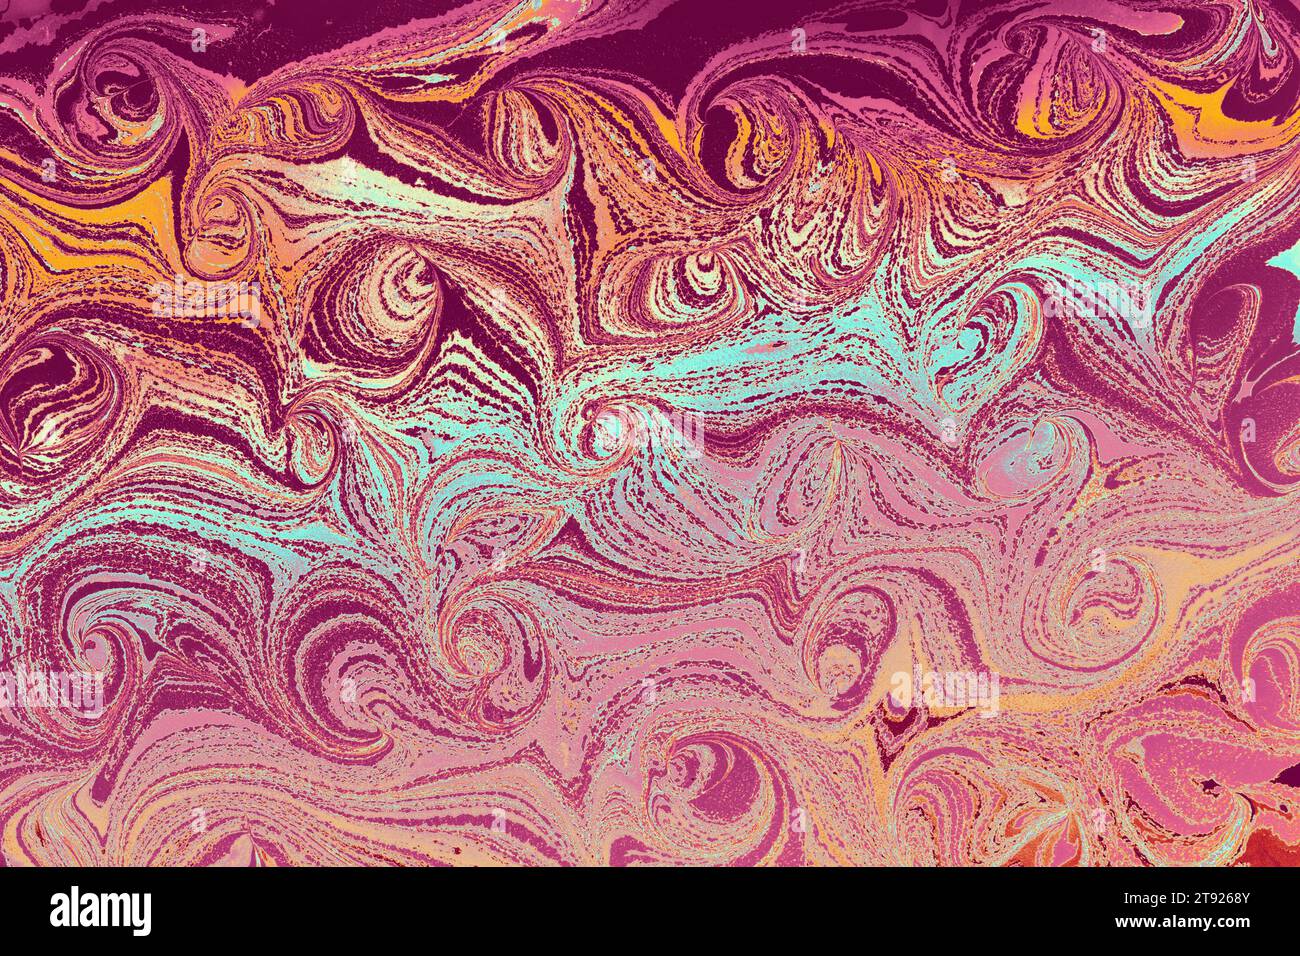 Abstract creative marbling pattern templat for fabric, design background texture Stock Photo